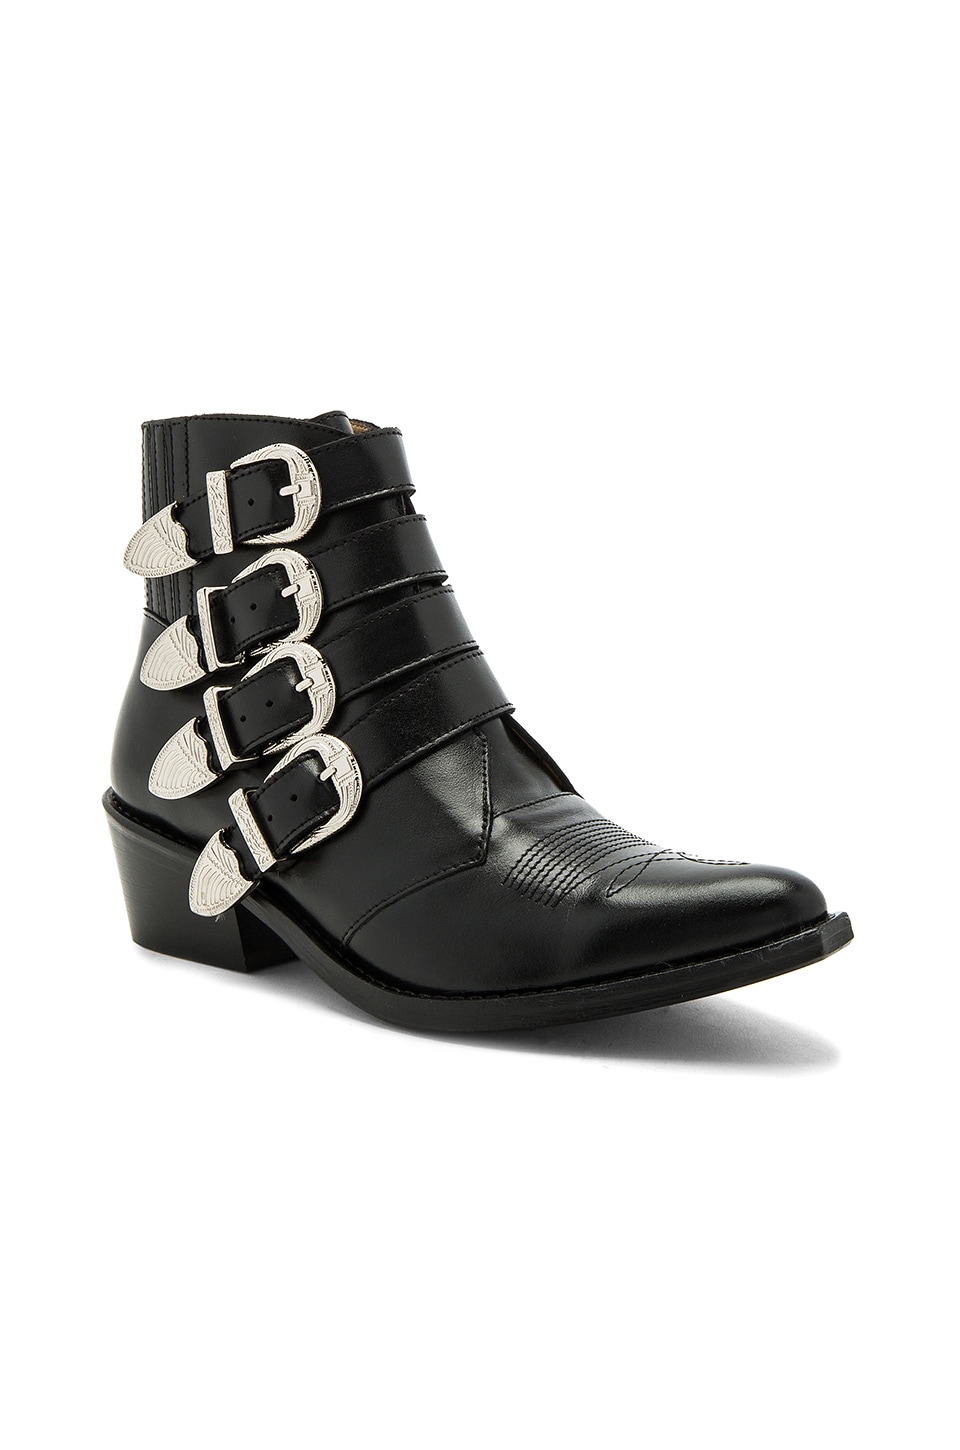 TOGA 50Mm Buckle Up Leather Cowboy Boots, Black in Black Leather | ModeSens